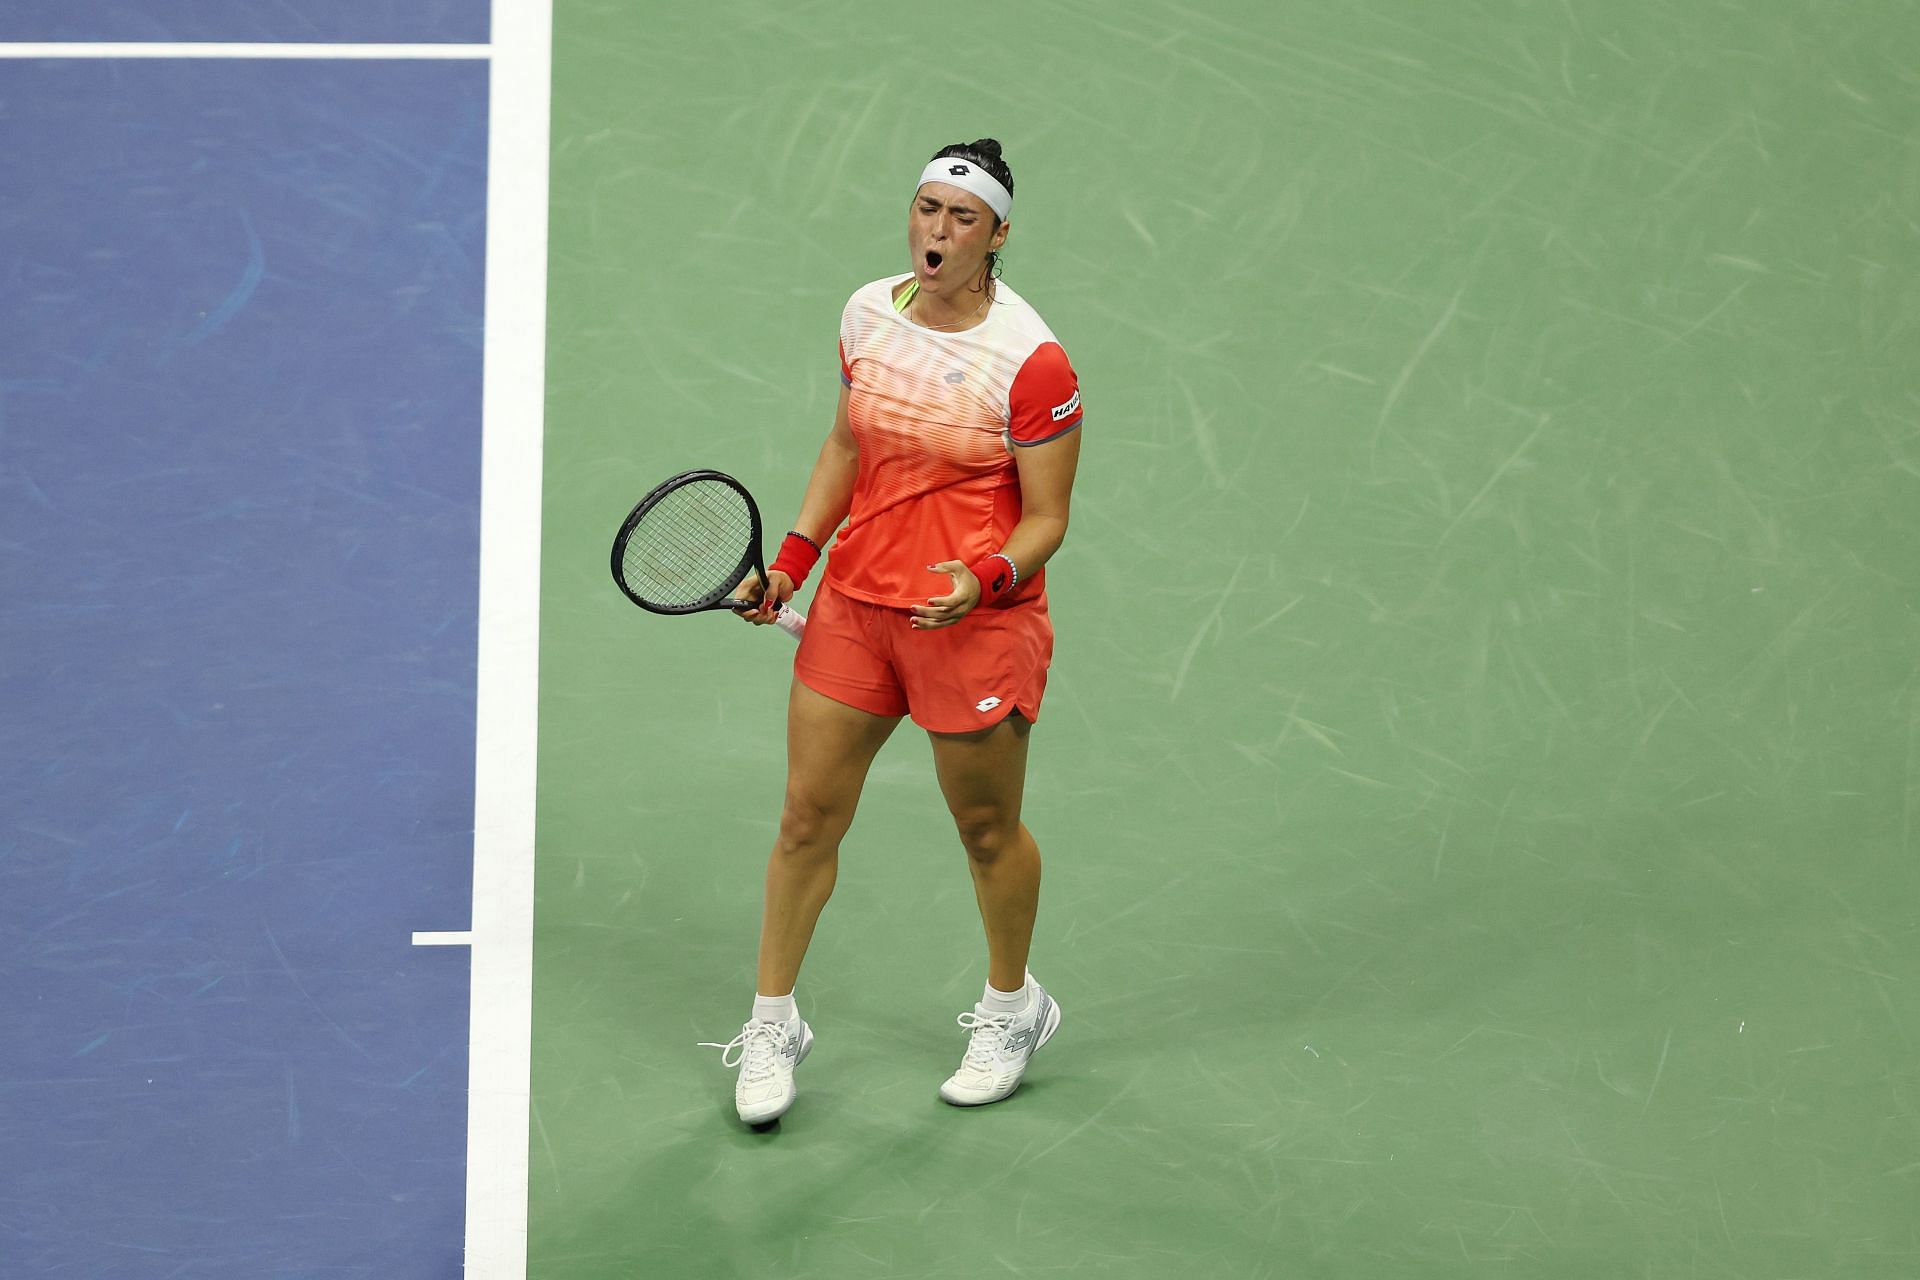 Ons Jabeur of Tunisia reacts against Veronika Kudermetova at the 2022 US Open - Day 7